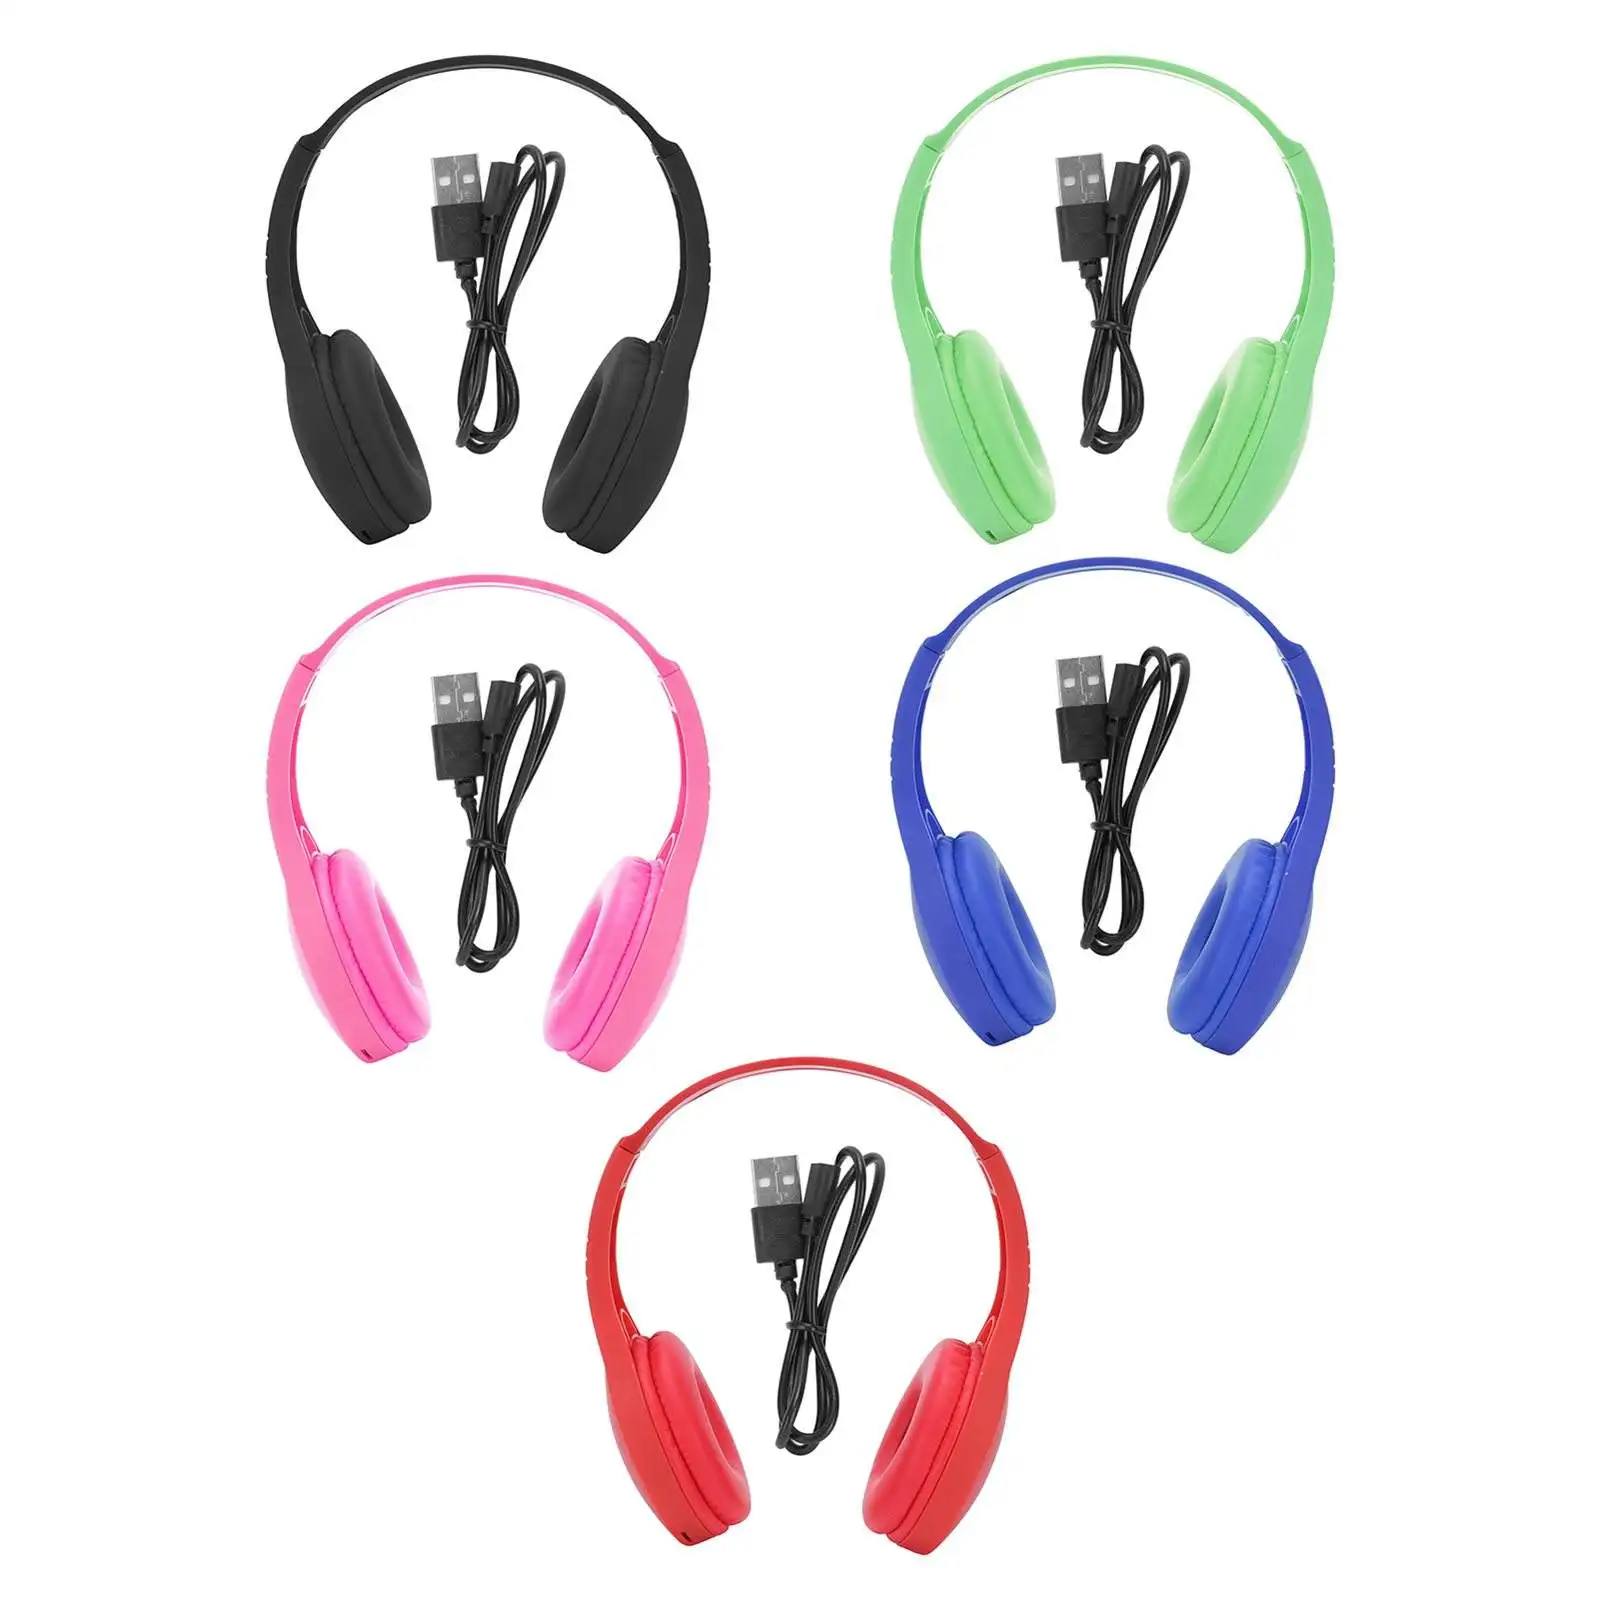 Over-Ear Wireless Headphones Active Noise Canceling Bluetooth Headset for Travel Office Computer Games Laptop TV Smartphones